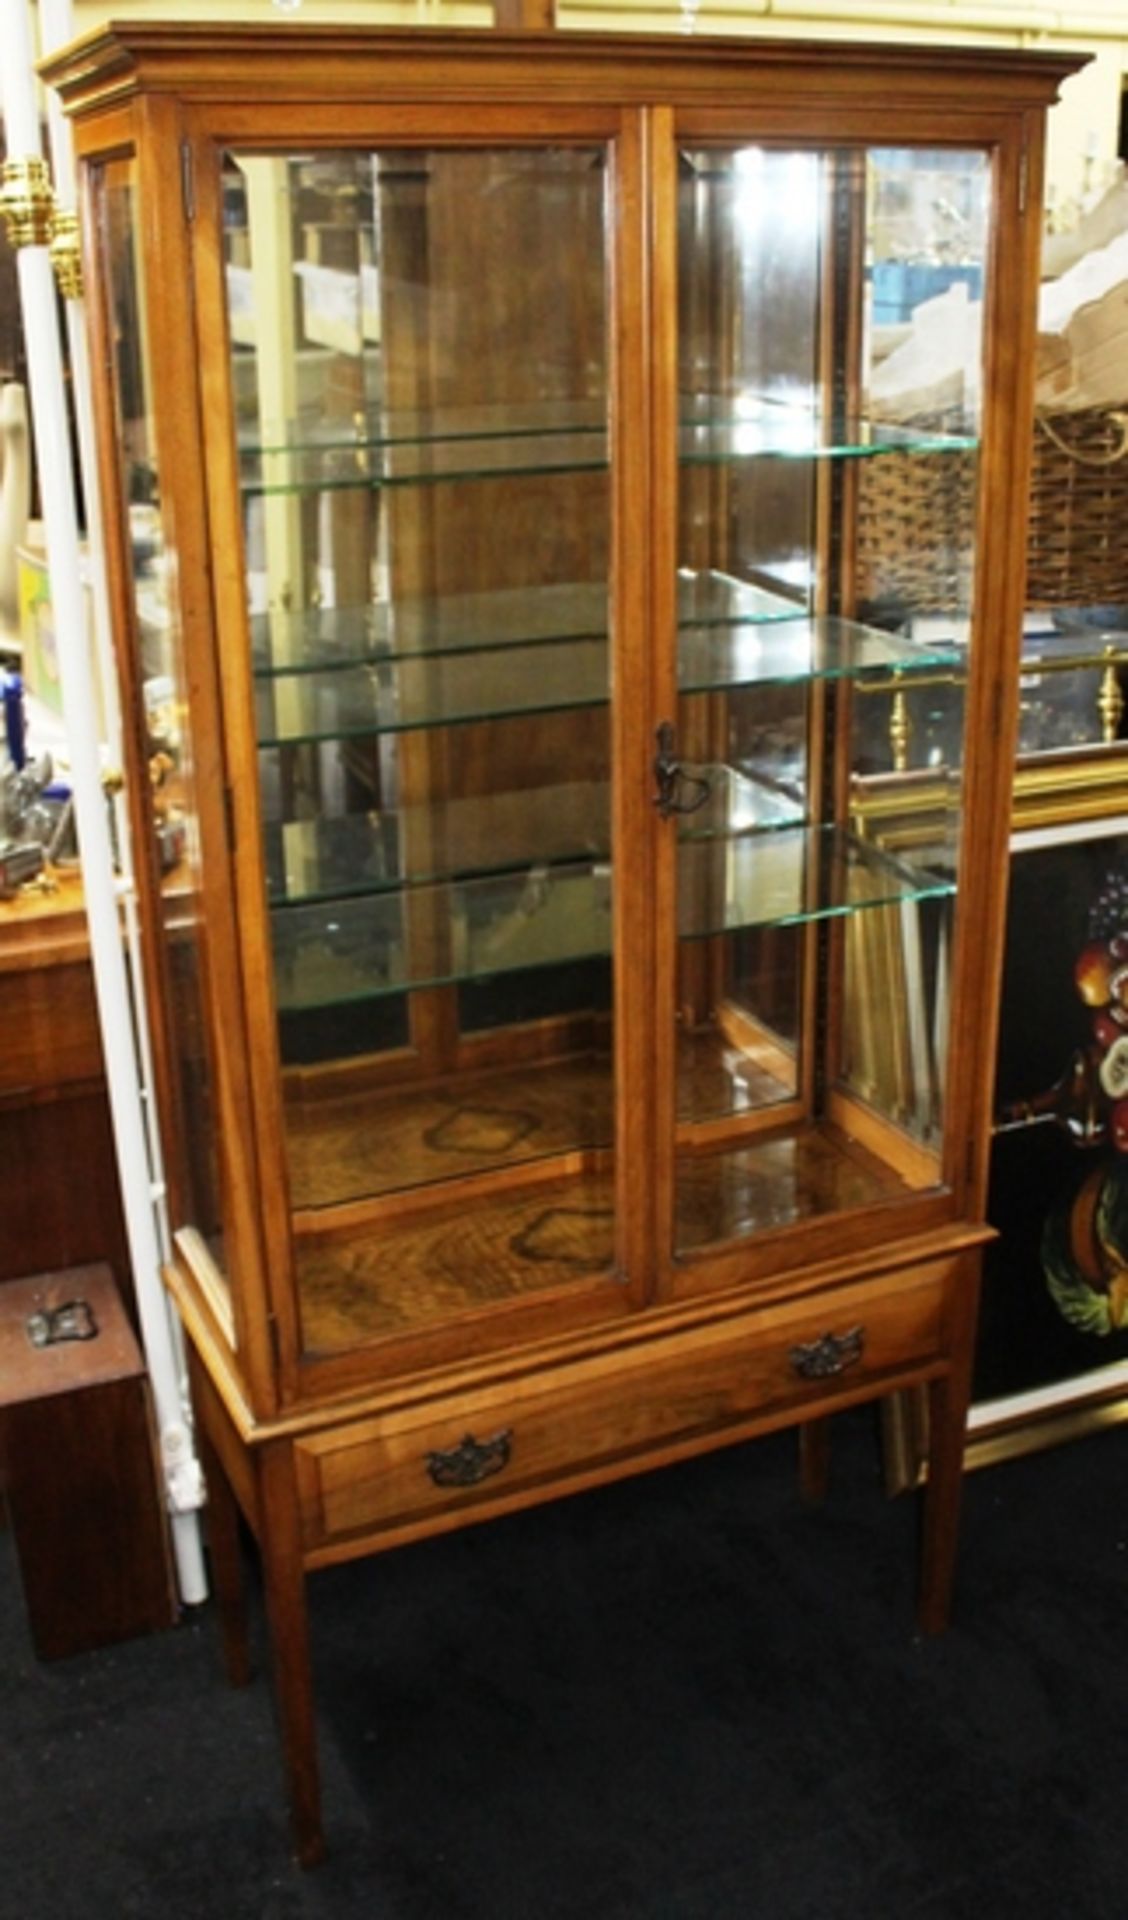 Glass Fronted Mahogany Display Cabinet